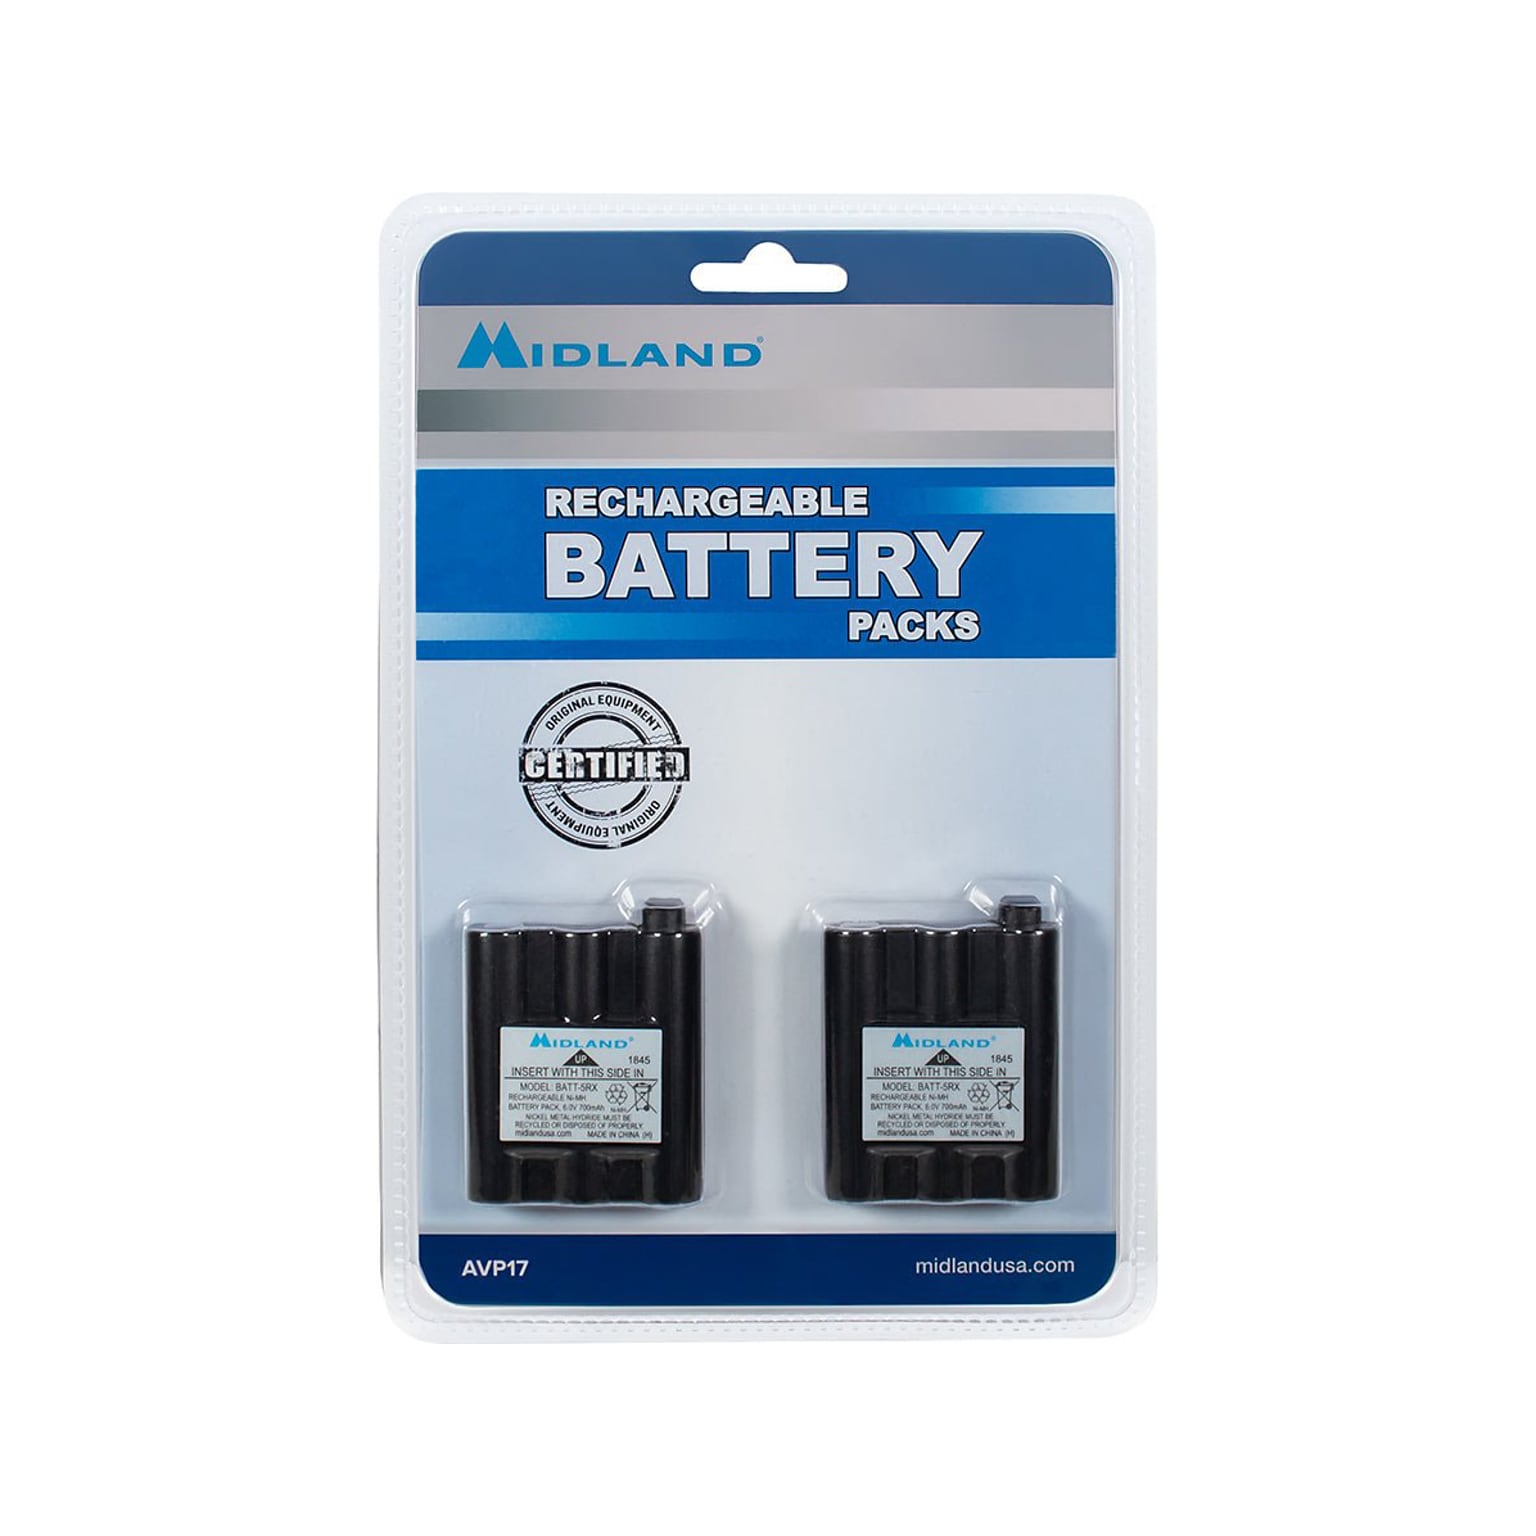 MIDLAND RADIO Rechargeable Ni-MH Battery Pack for GXT Series, T290 Series, XT511 Base Camp Radios, 2/Pack (AVP17)